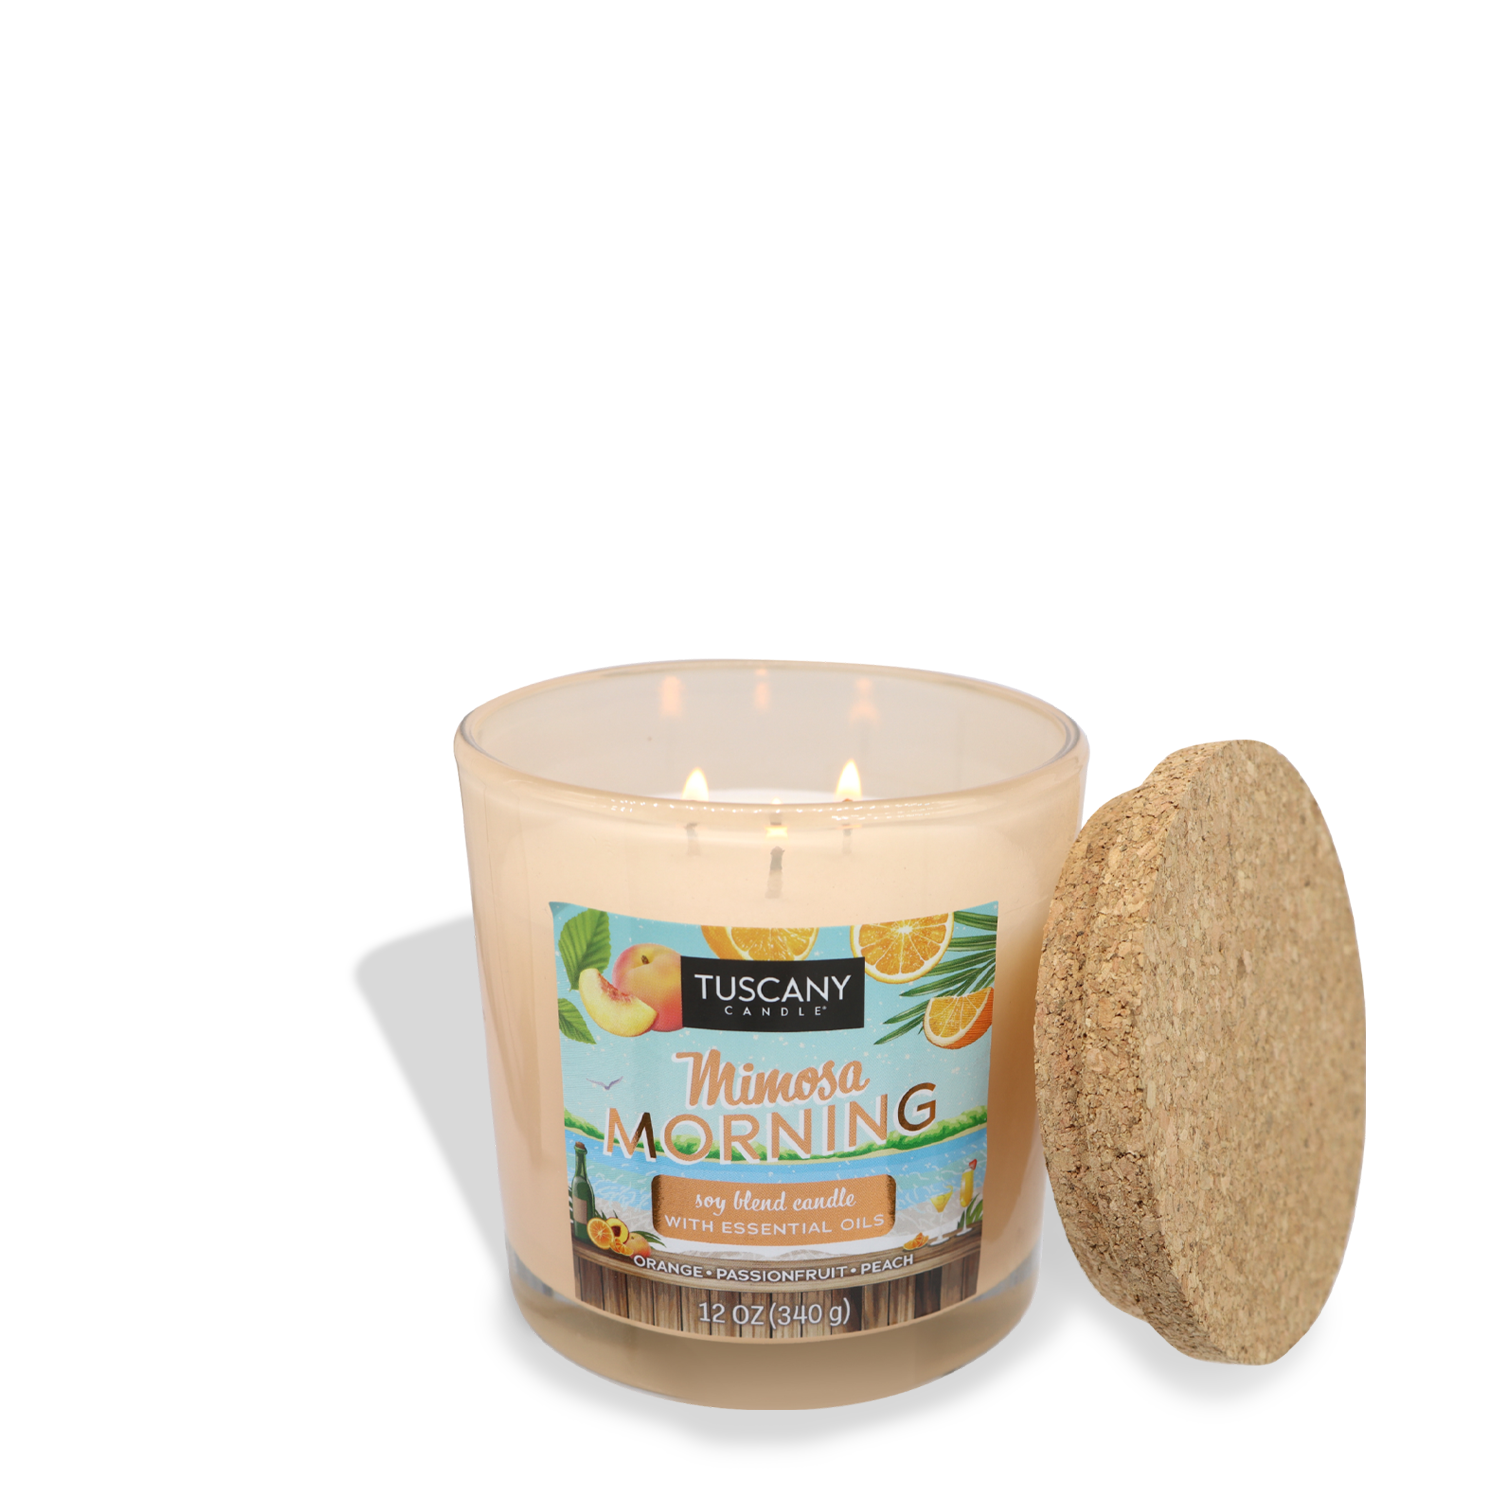 A glass jar candle labeled "Mimosa Morning (12 oz) – Sunset Beach Bar Collection" with essential oils by Tuscany Candle® SEASONAL, featuring citrus and peach imagery on the label. The candle is lit, its warm glow enhancing the vibrant design, while the cork lid is placed to the side.